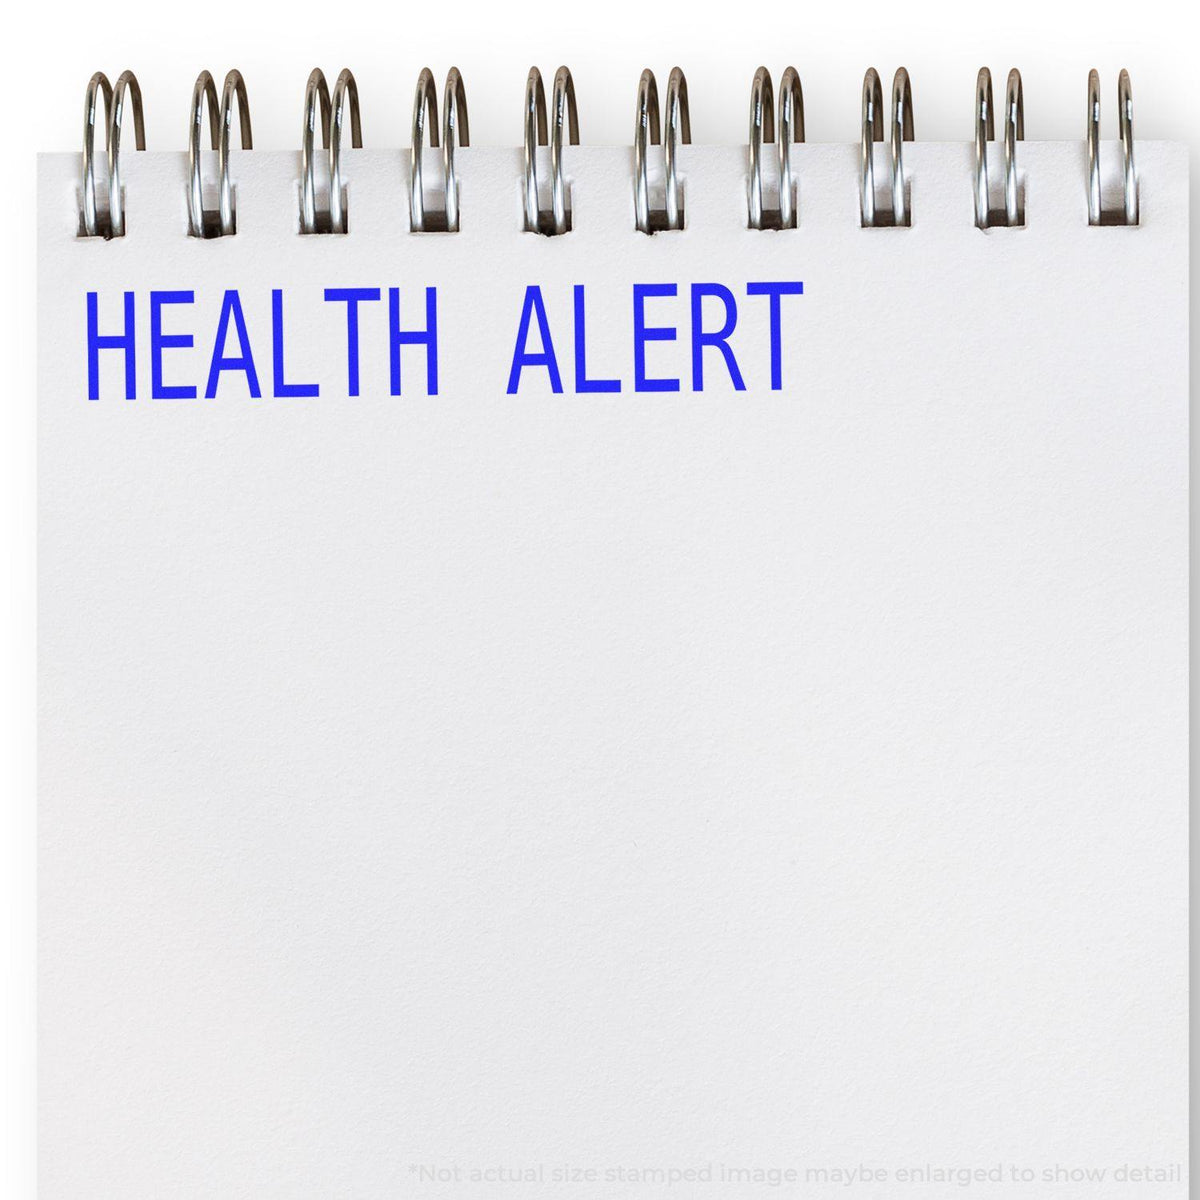 In Use Health Alert Rubber Stamp Image